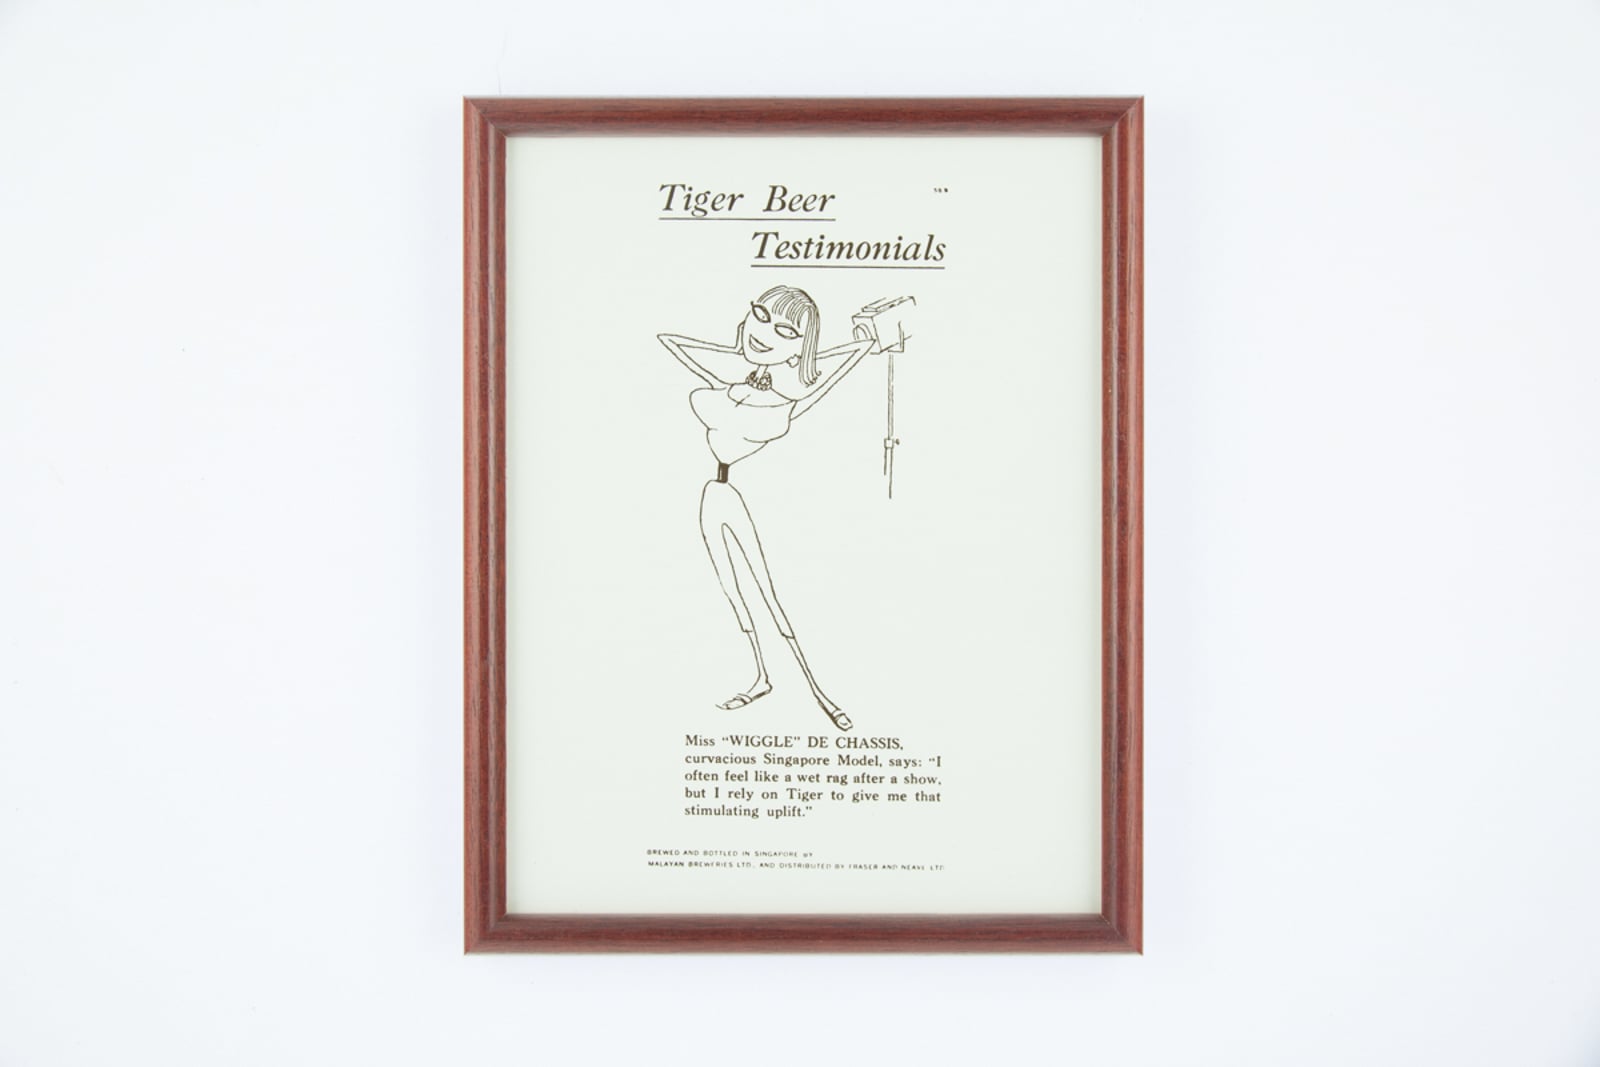 Malayan Breweries "Tiger Beer Testimonials - Miss "Wiggle" de Chassis" Print Advertisement Reproduction